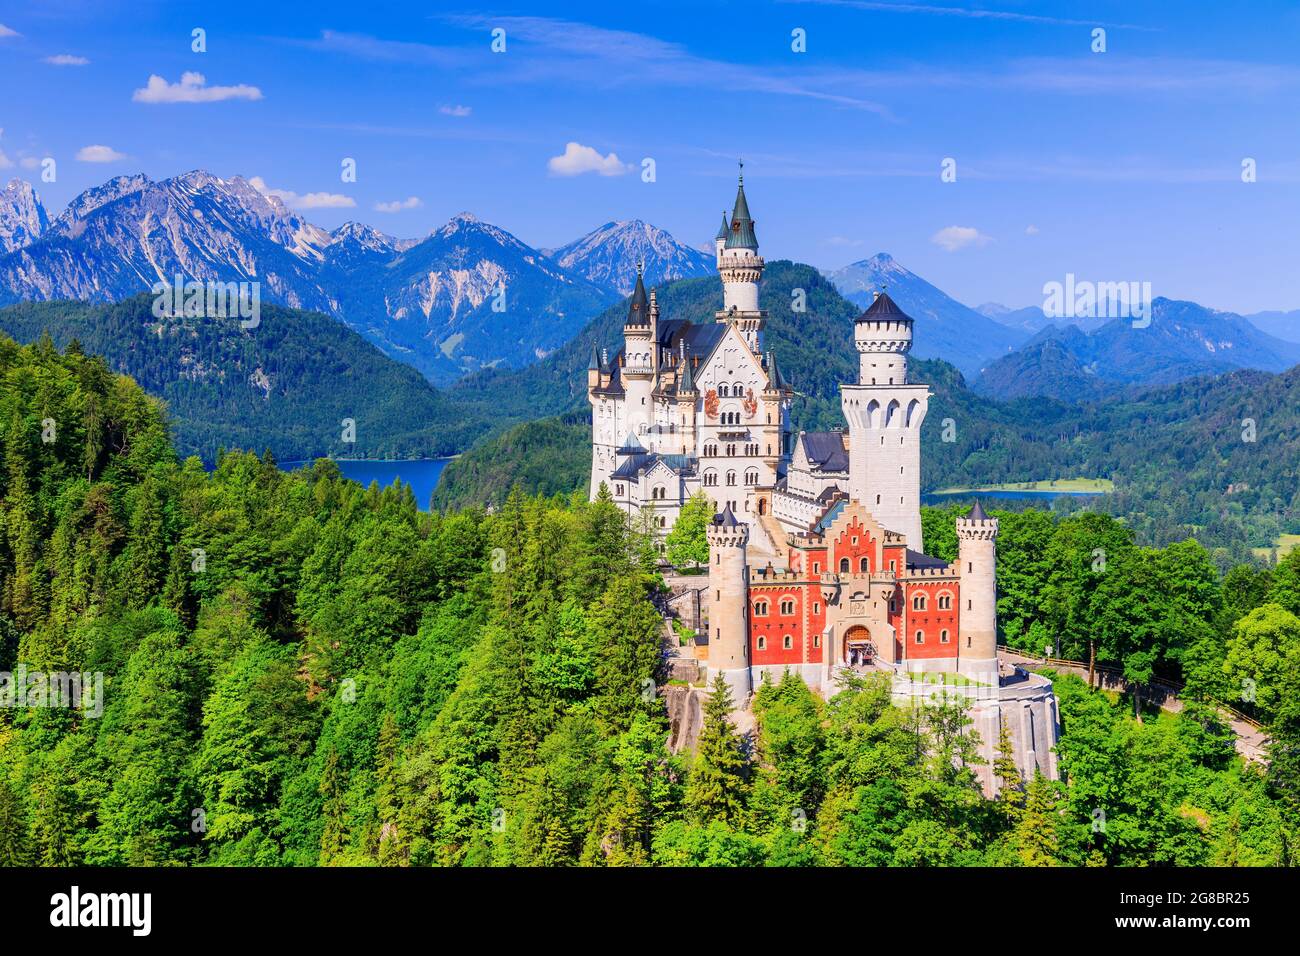 Neuschwanstein Castle, Germany. Front view of the castle with the Bavarian Alps in the background. Stock Photo